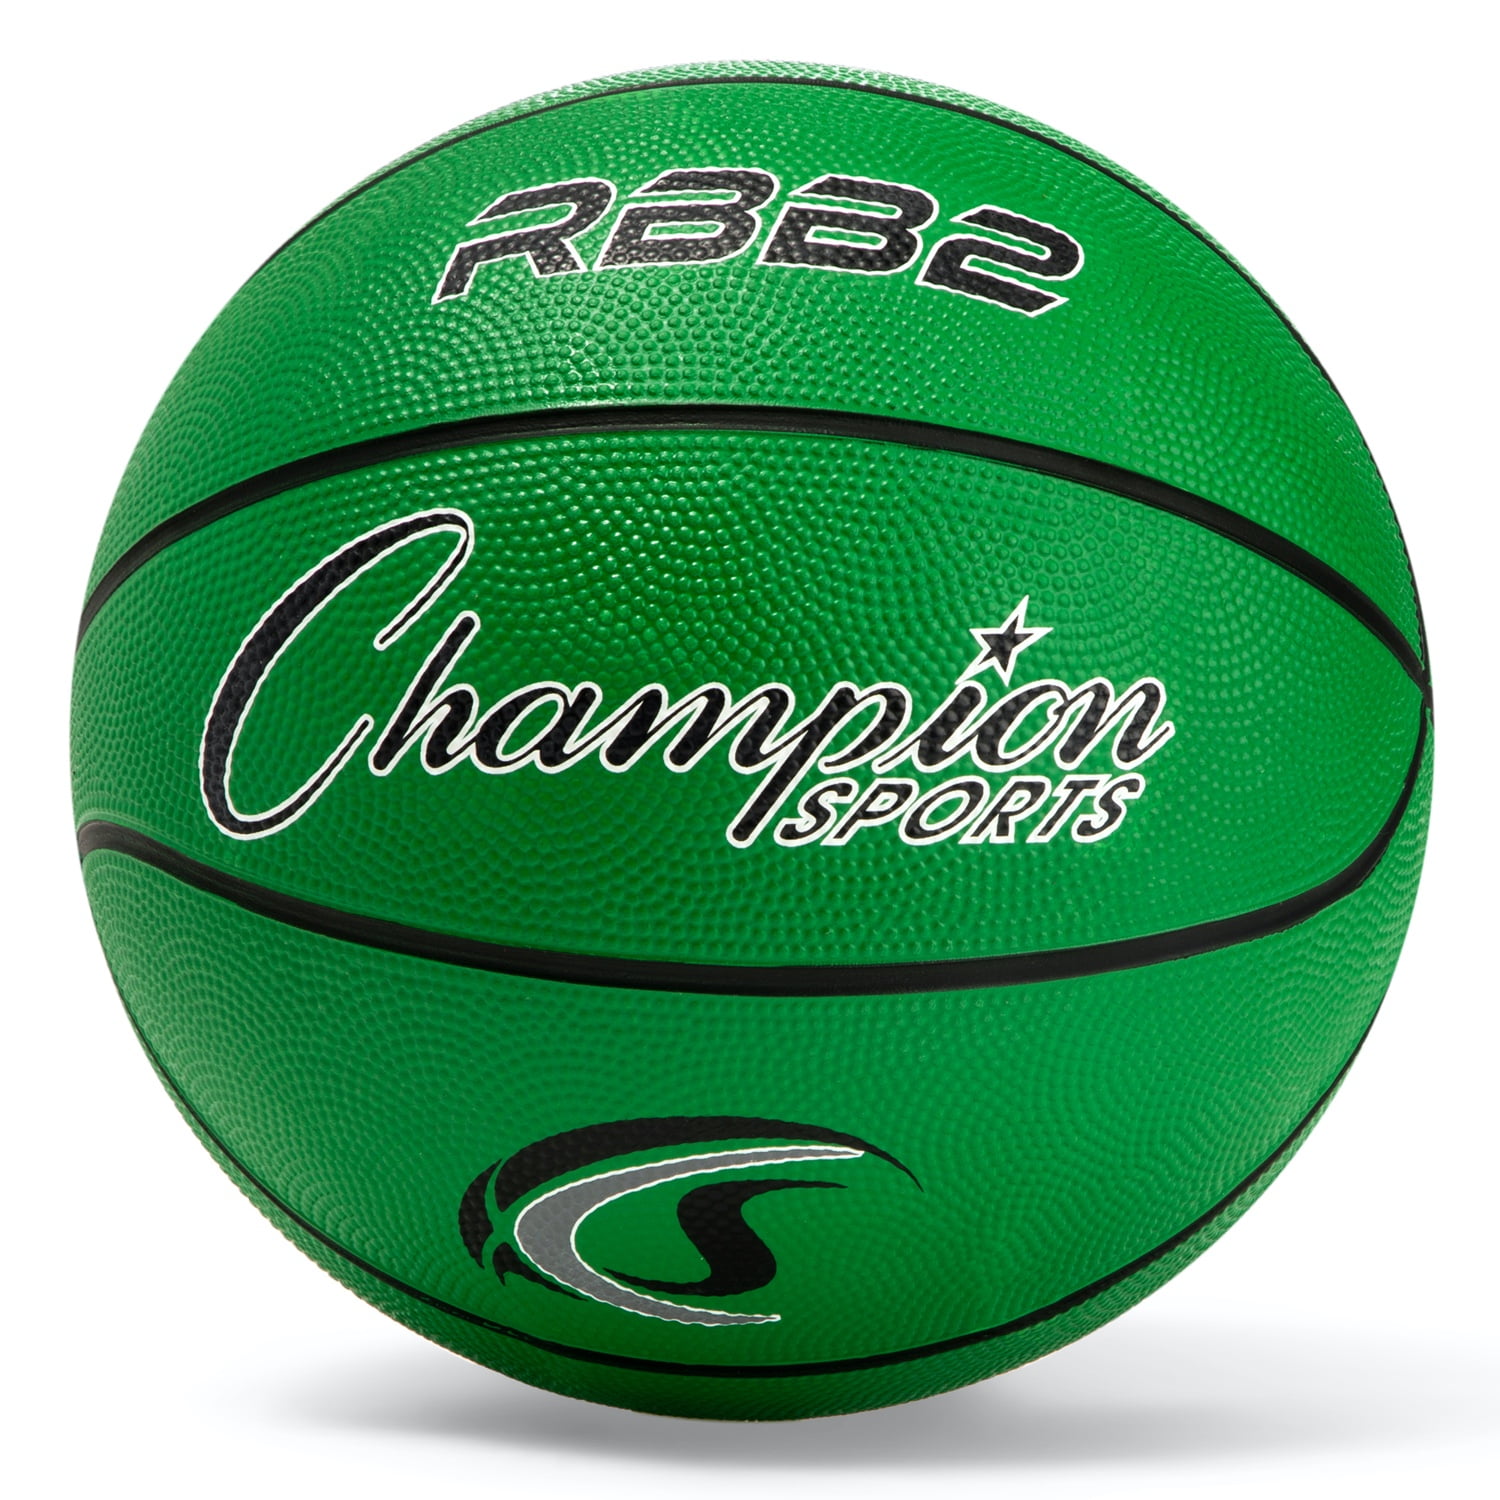 Picture of Champion Sports 04306 27.5 in. Basketball, Green